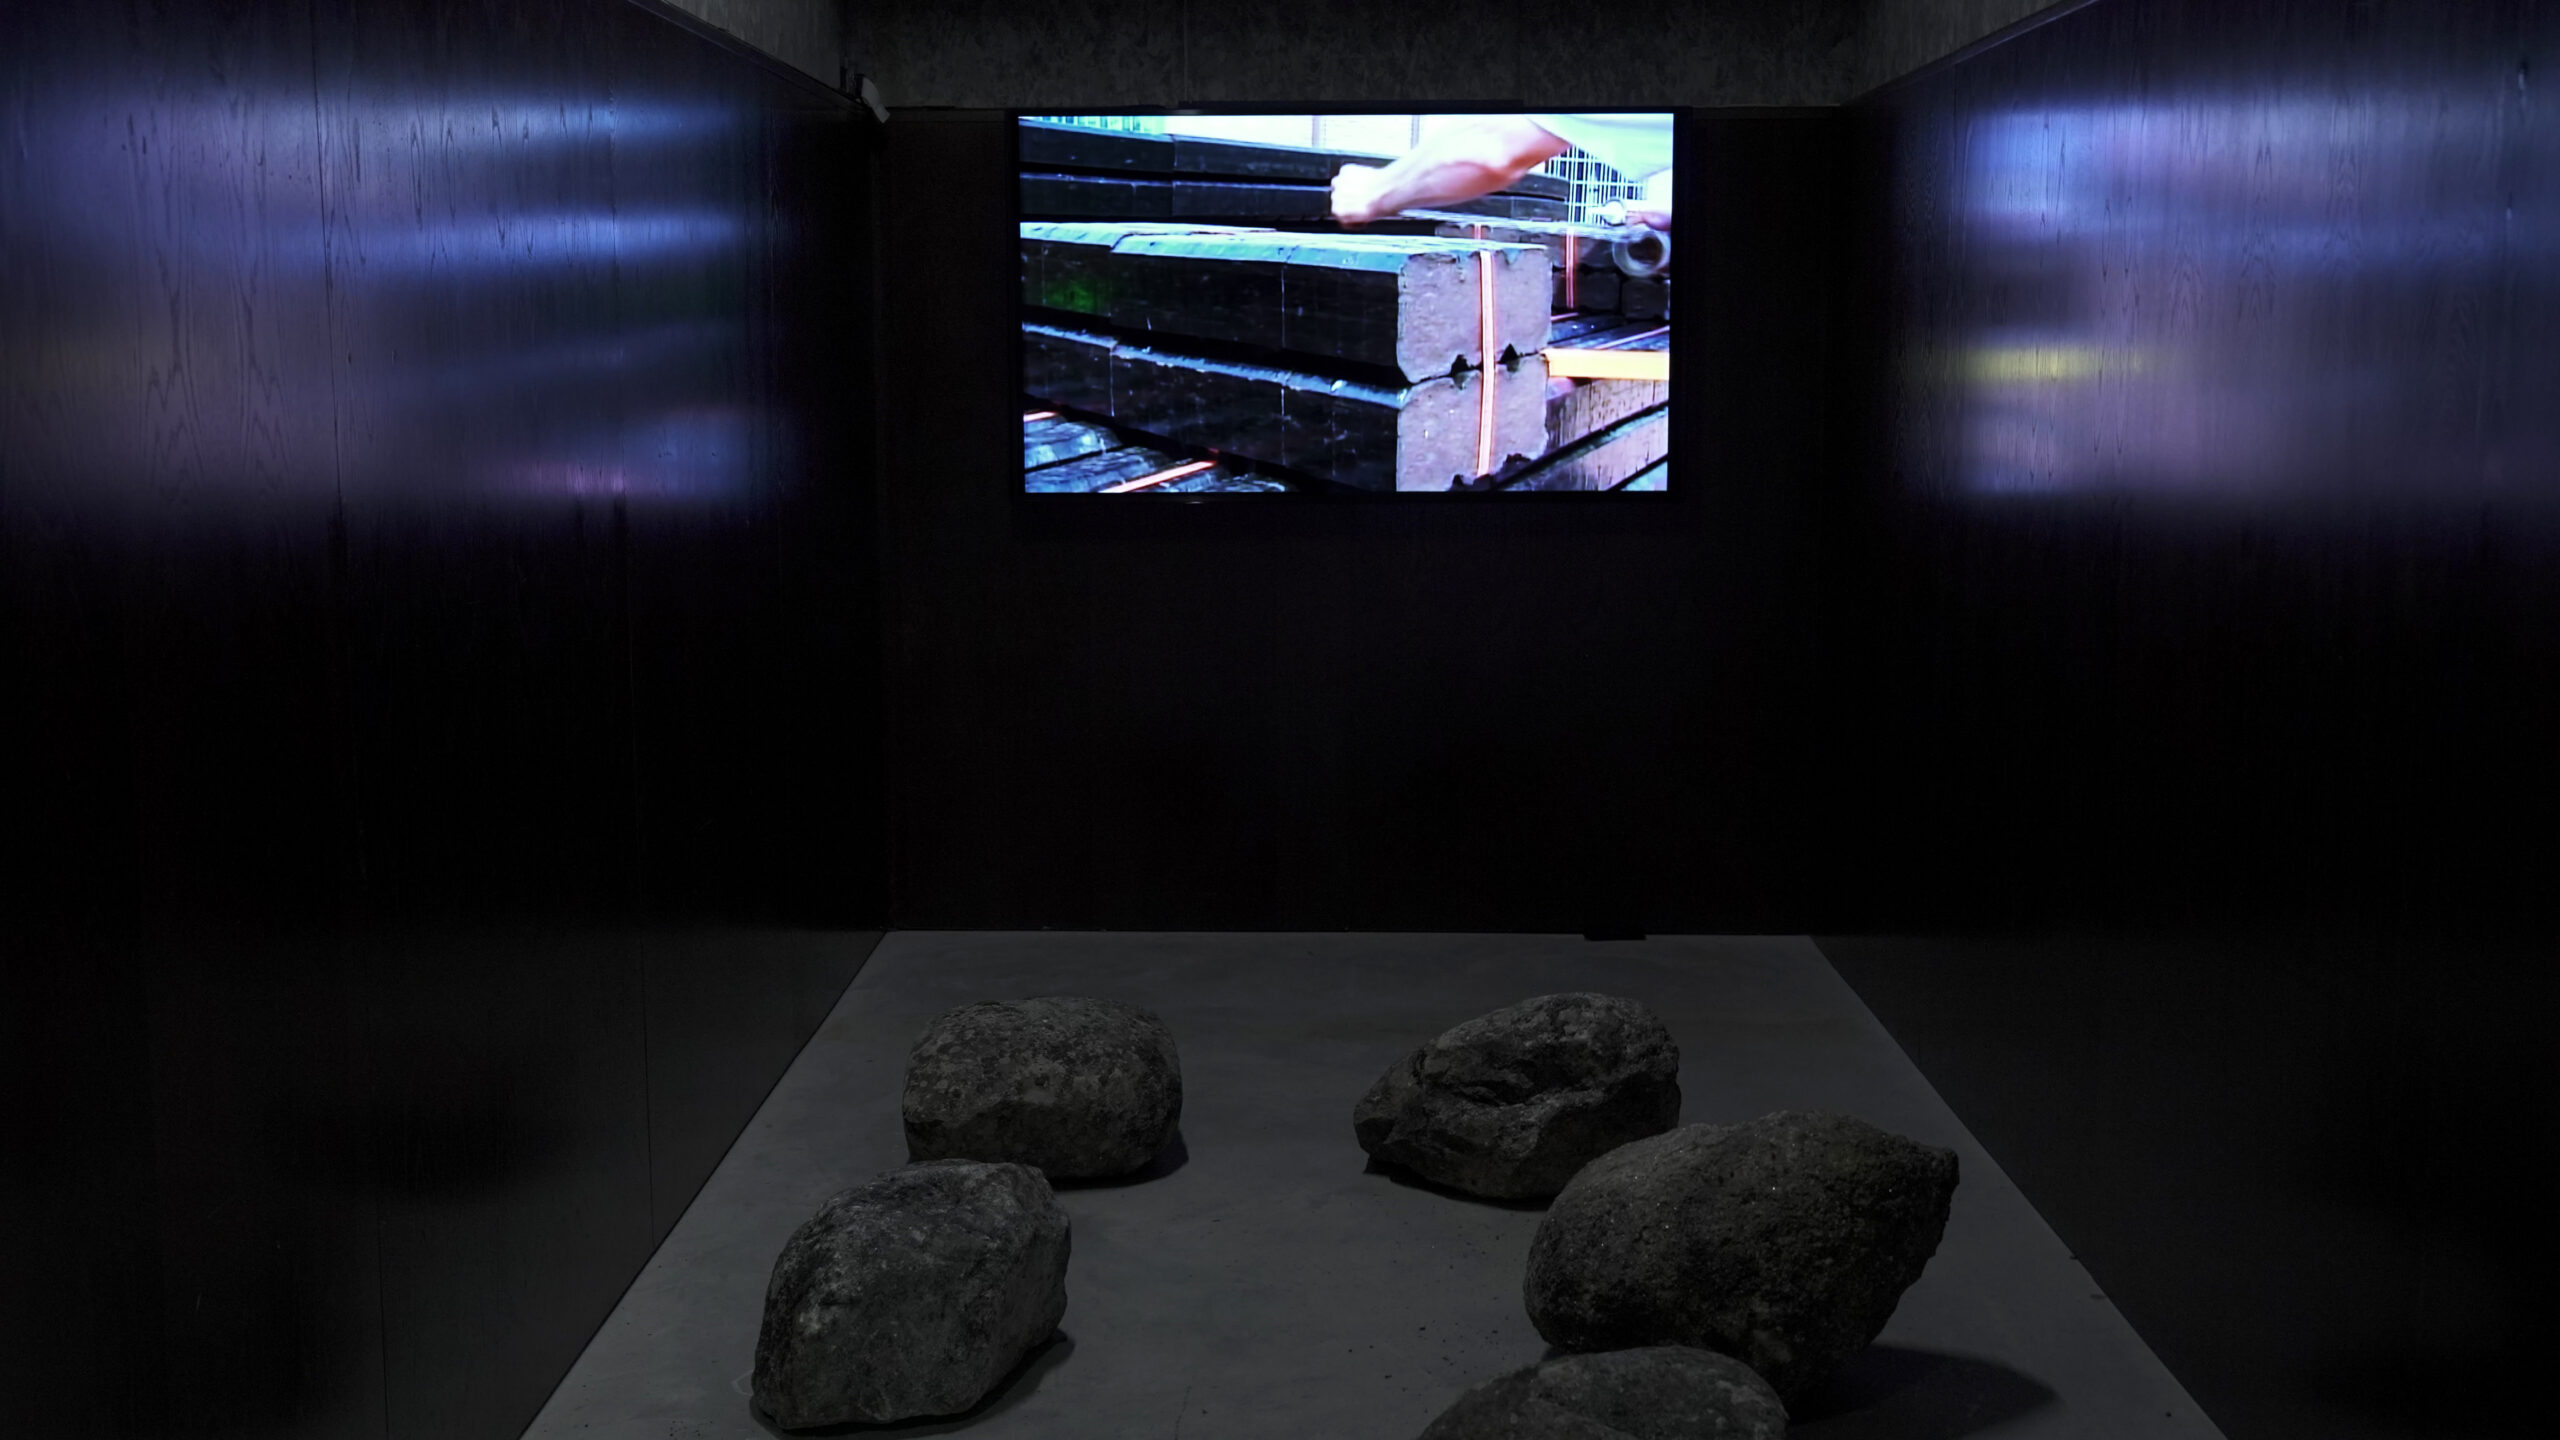 Dark room with film projection. Large rocks on the floor